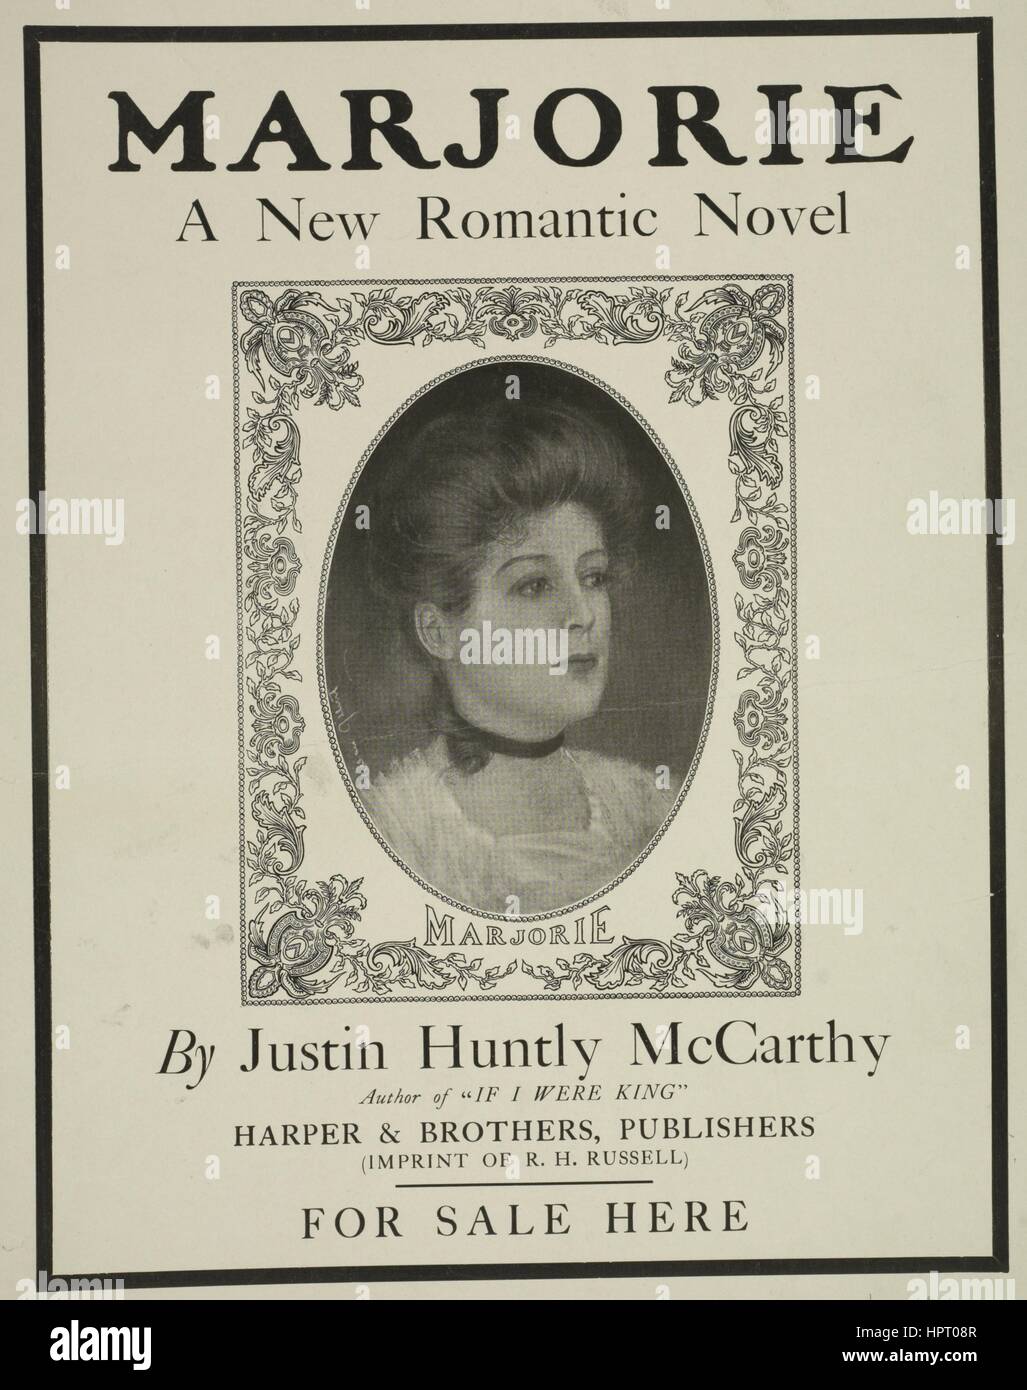 Poster advertisement for a book titled Marjorie a New Romantic Novel by Justin Huntly McCarthy which depicts a chest up portrait of a woman, 1903. From the New York Public Library. Stock Photo